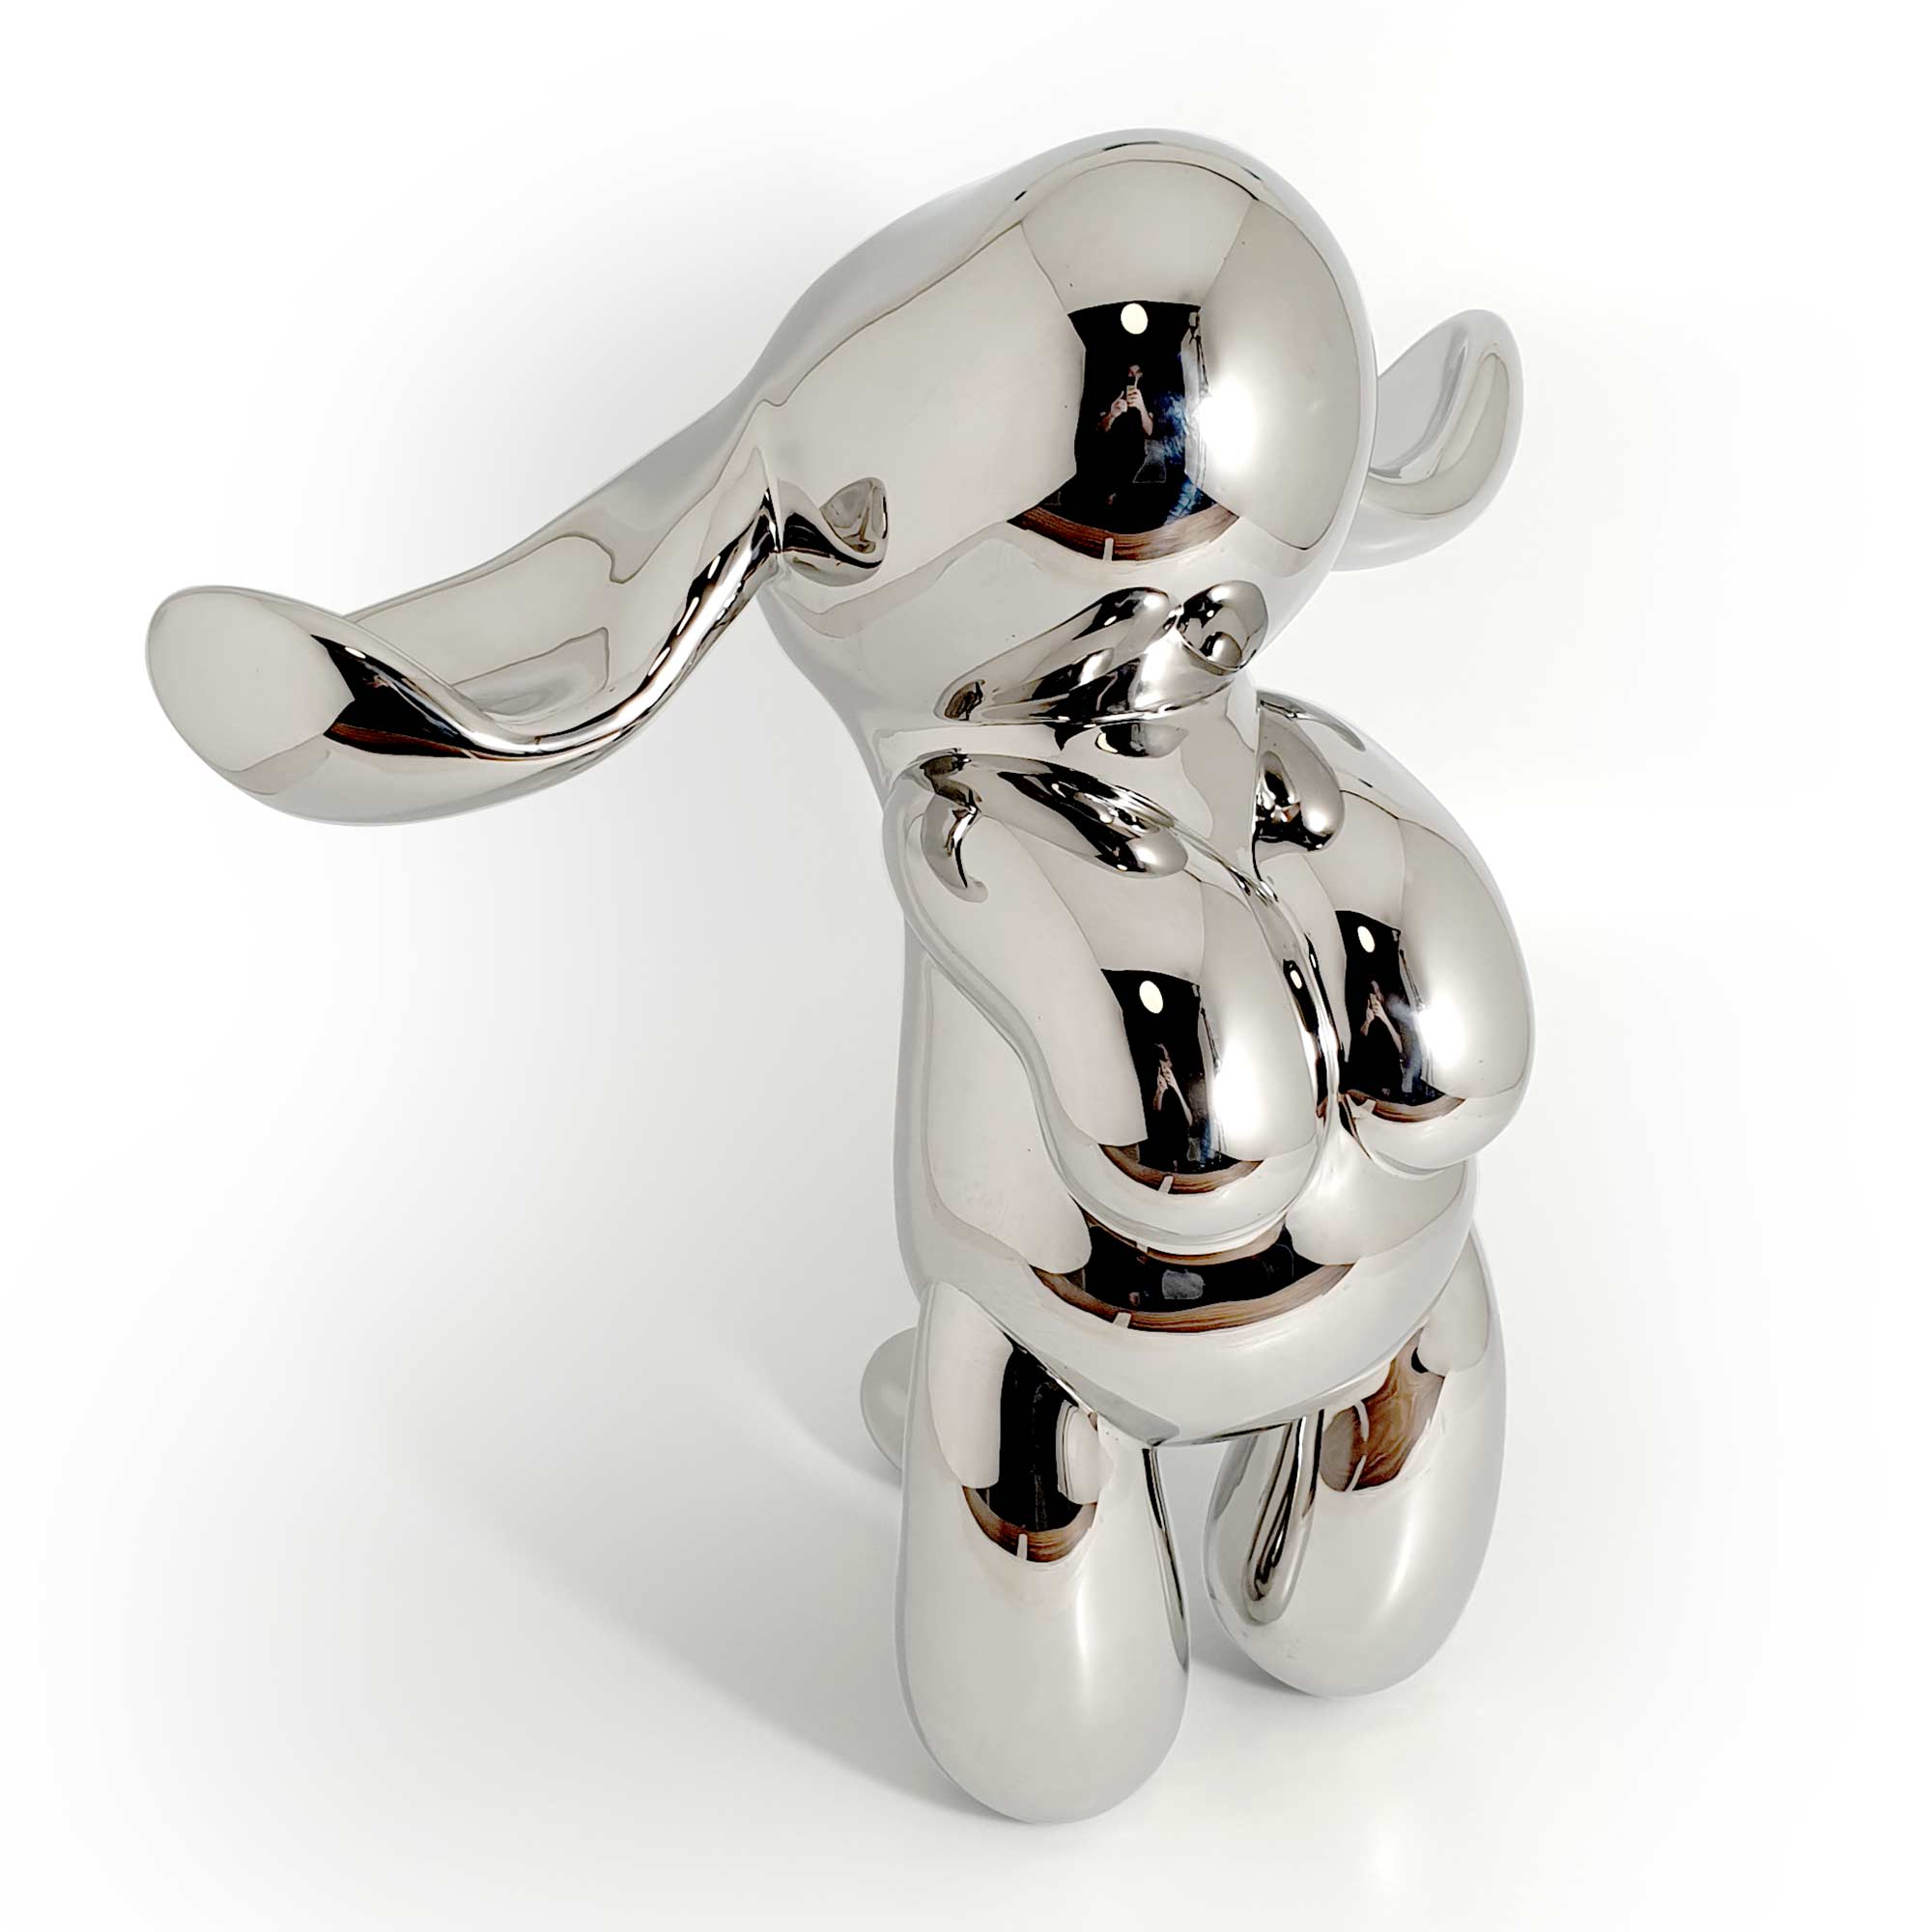 Up and up, dog sculpture, Mirror Polished Stainless Steel Sculpture, by artist Ferdi B Dick, hero view